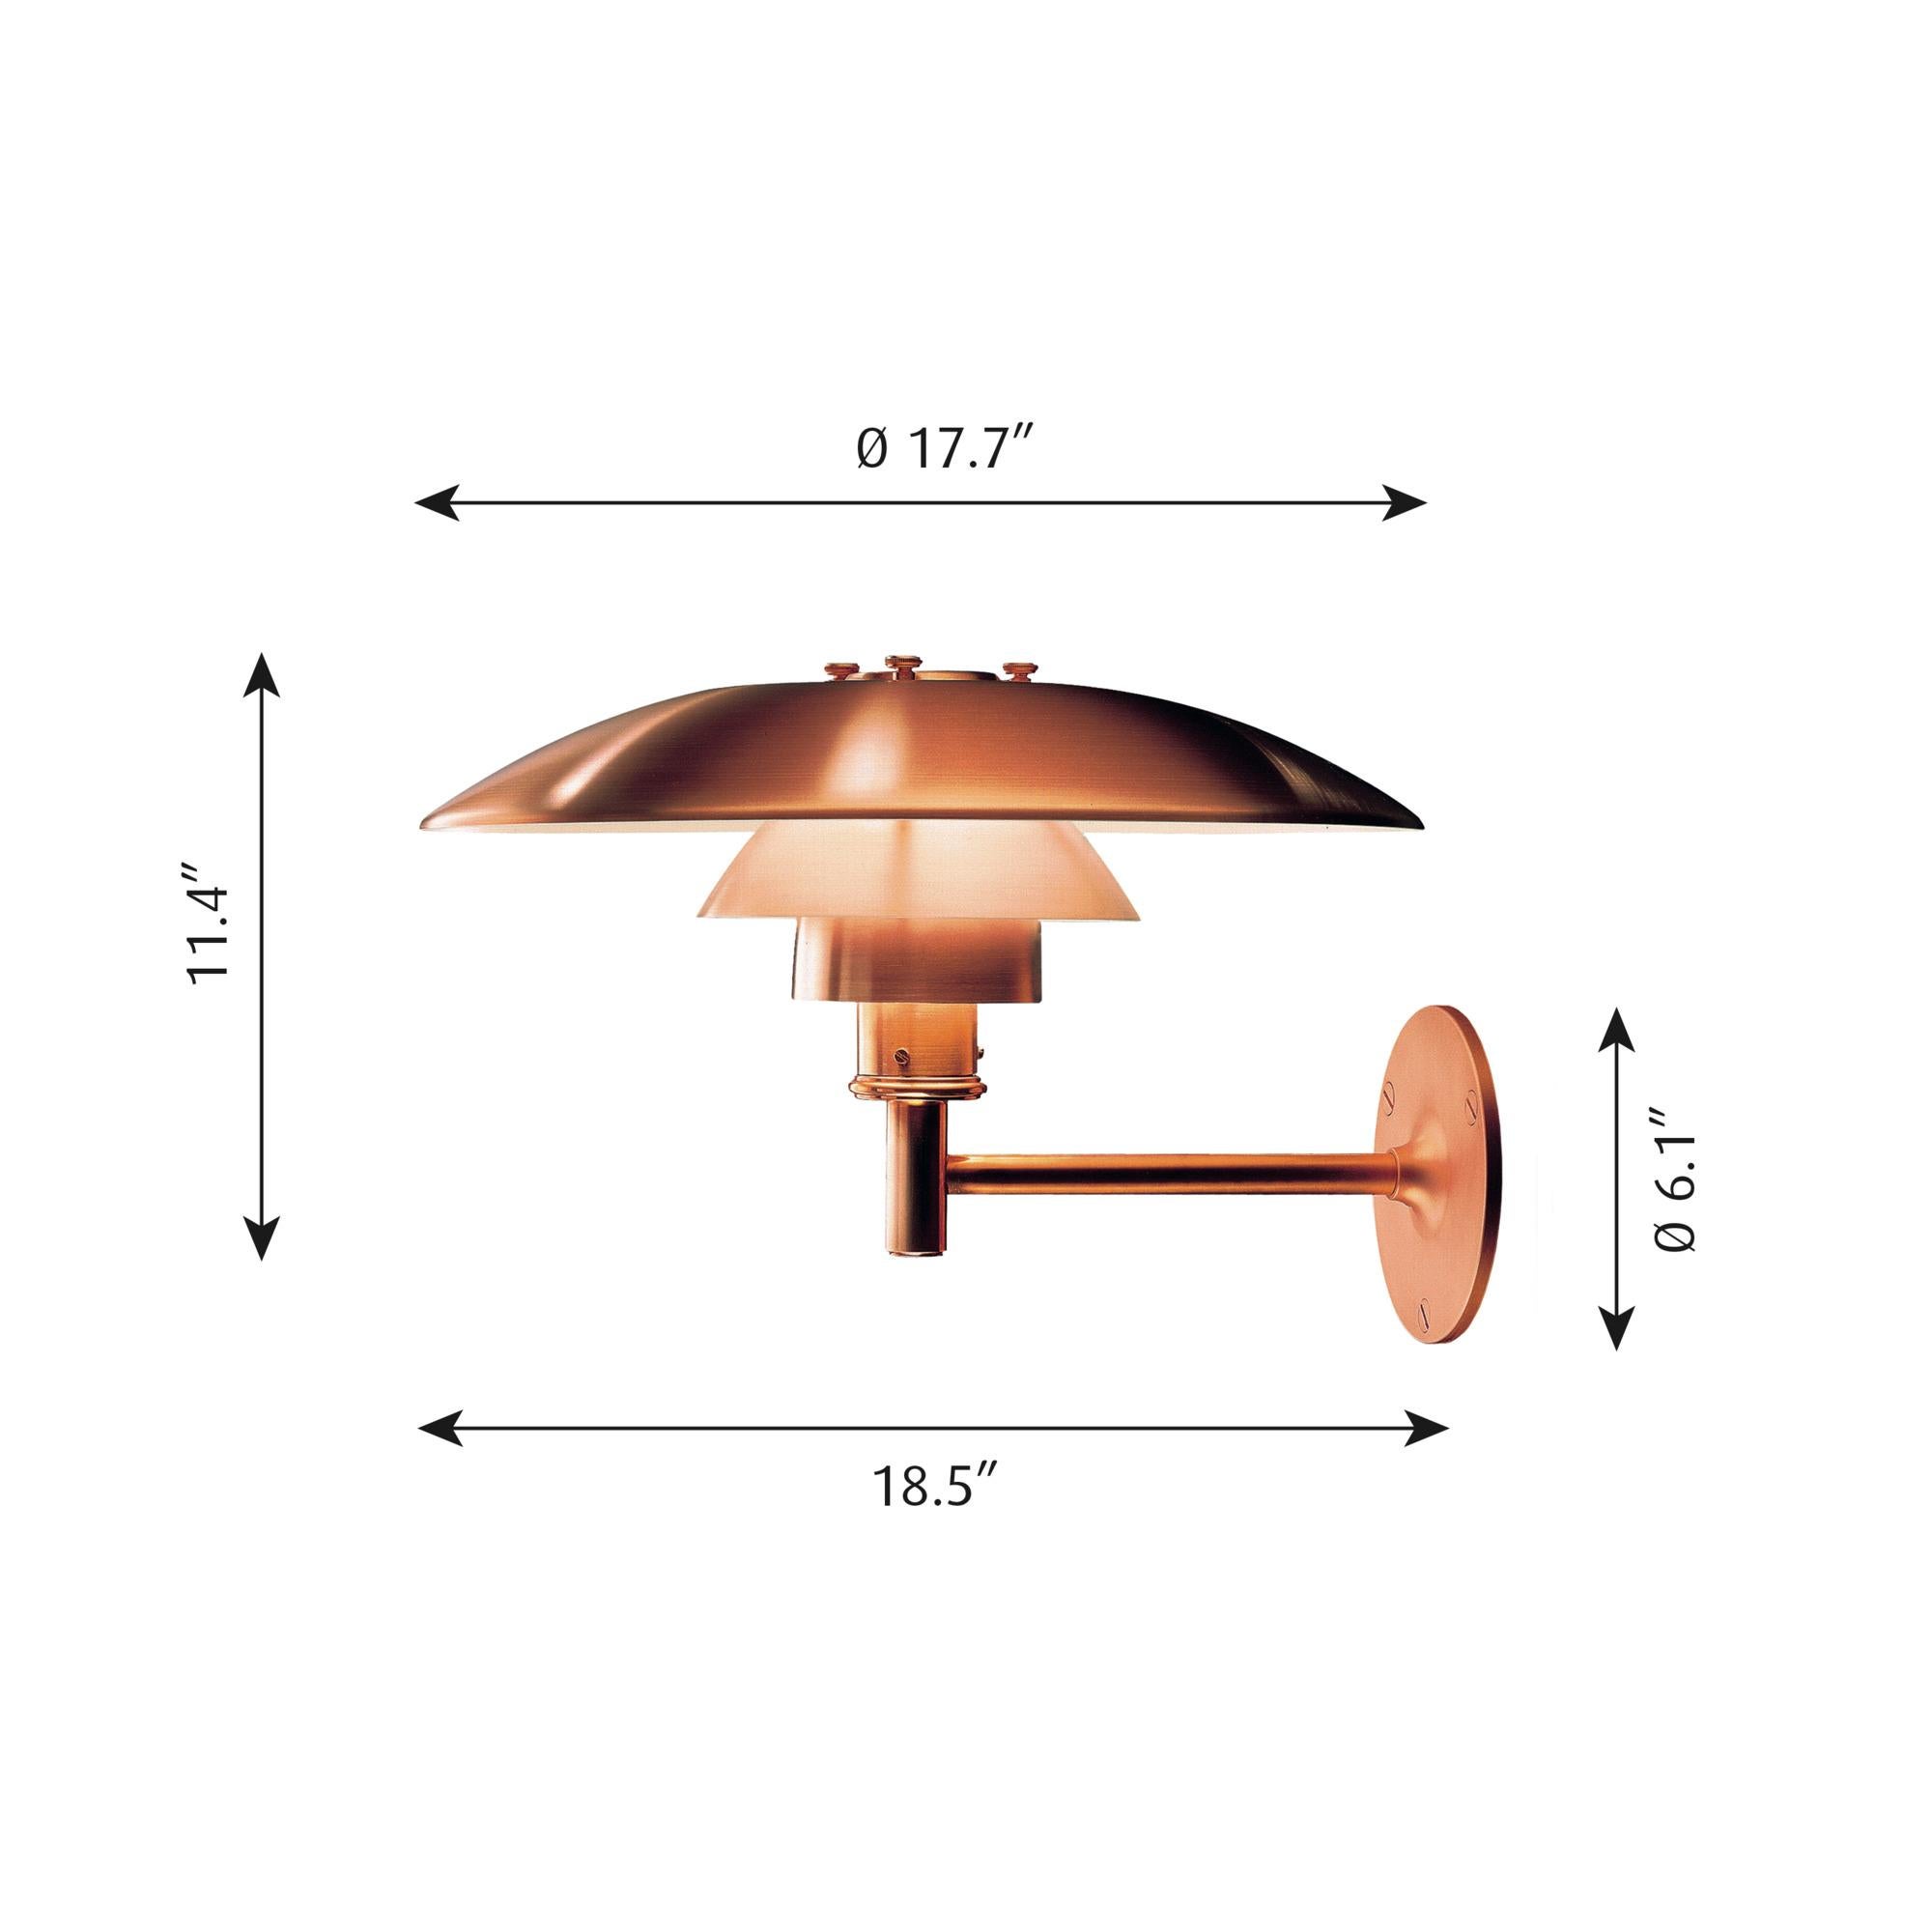 Large Poul Henningsen 'PH Wall' outdoor sconce for Louis Poulsen in raw copper. The PH Wall is part of the revolutionary three shade system developed by Paul Henningsen in 1925-1926 where the metal shades of the lamp ingeniously cast a uniform and